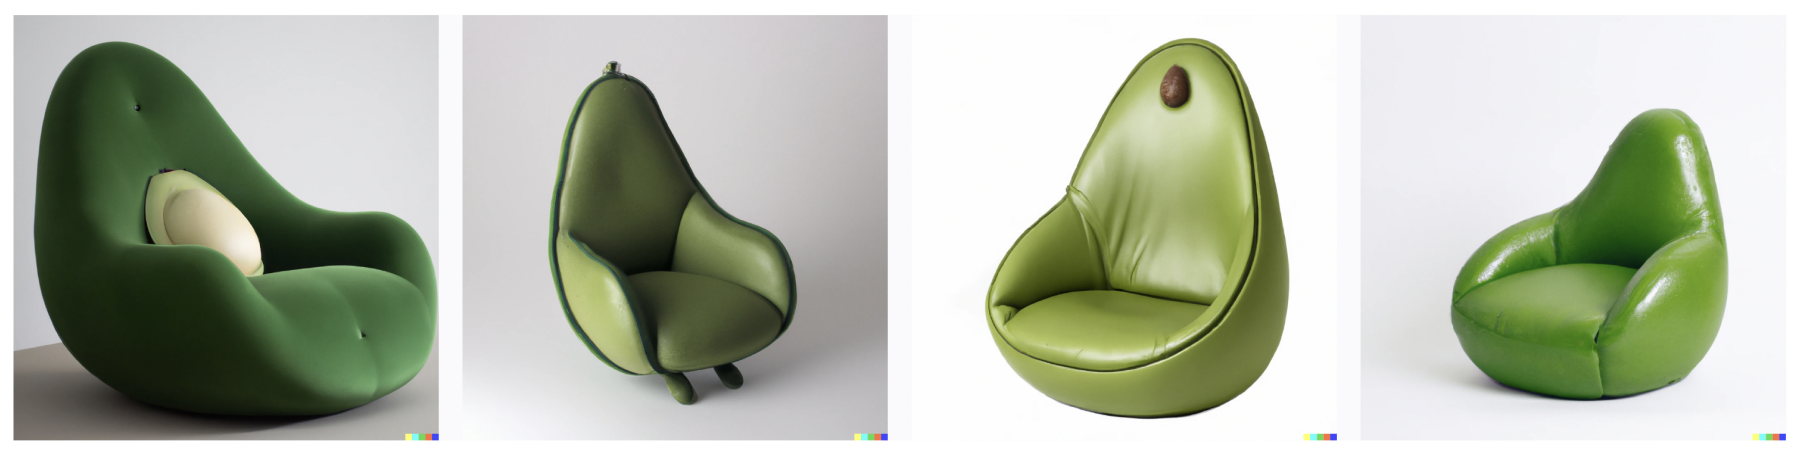 Four alternatives of armchairs in avocado shape generated with DALL·E 2 beta.